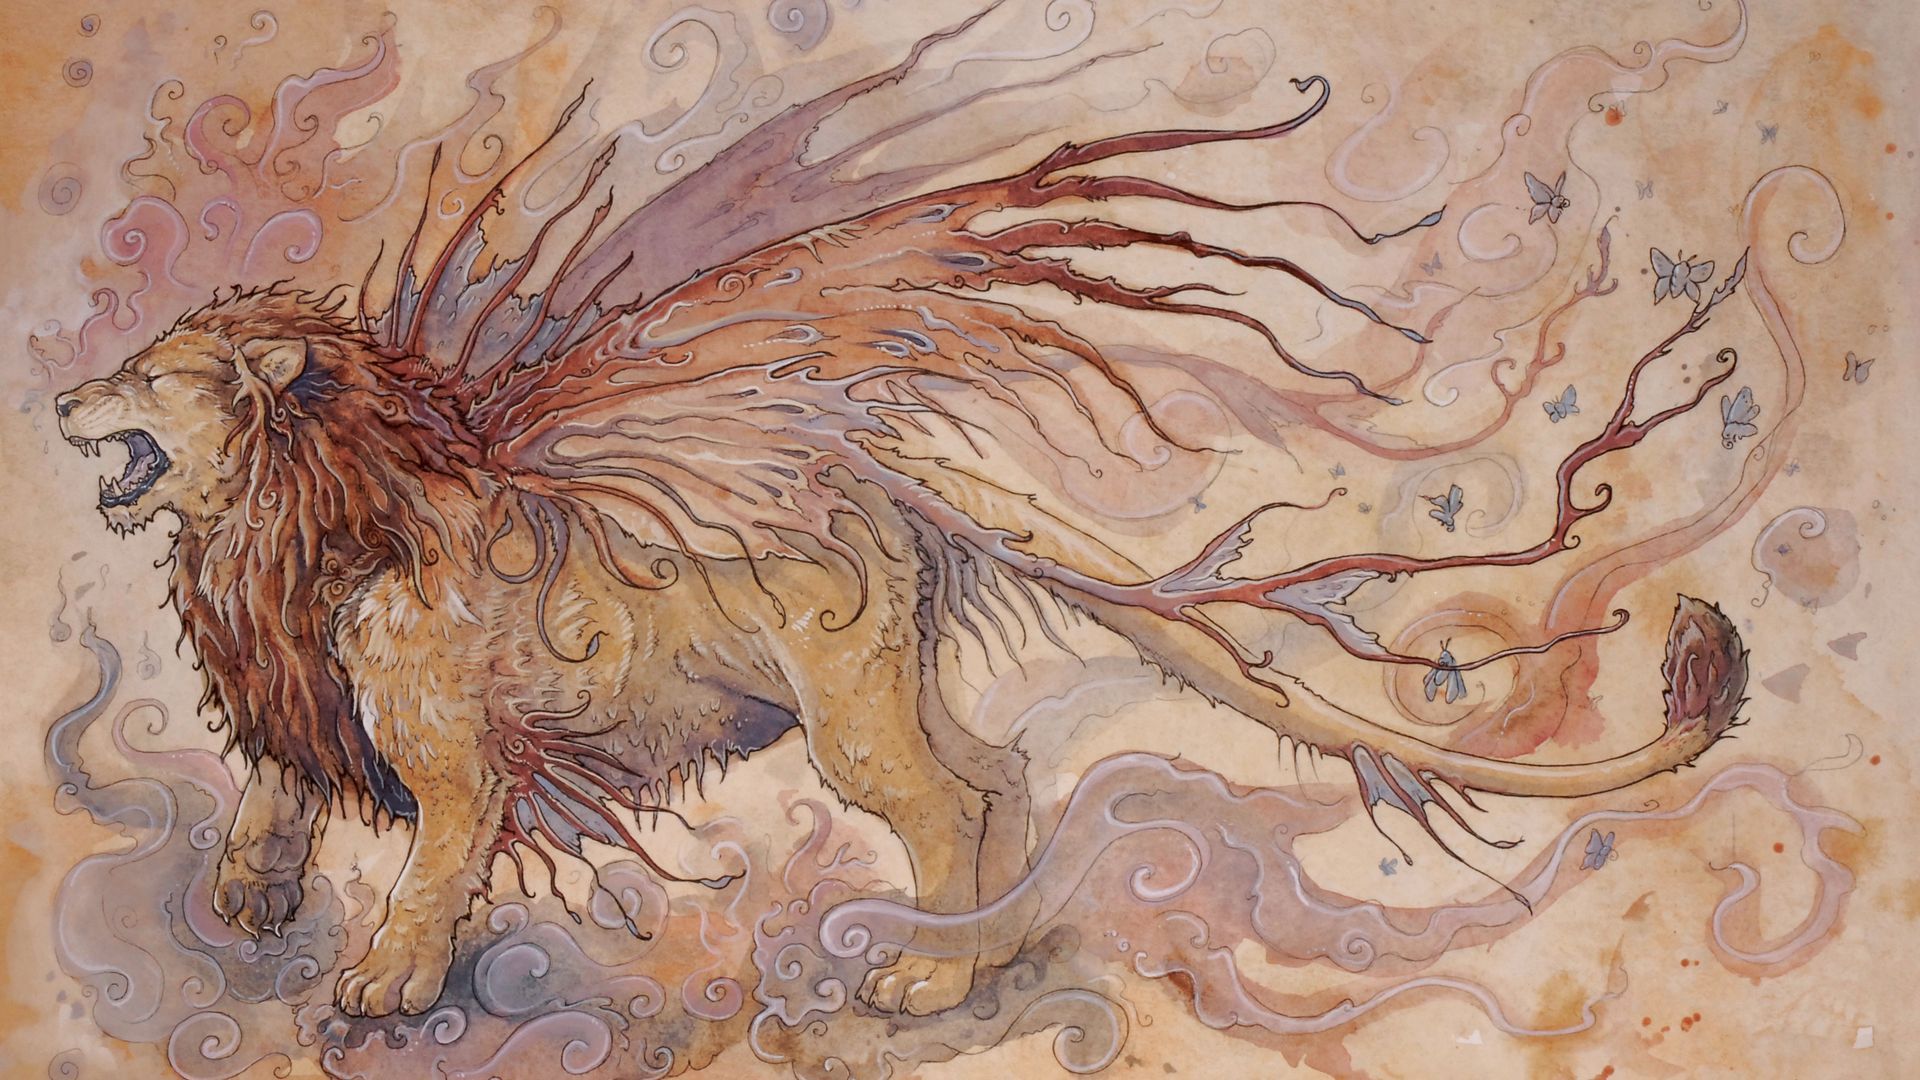 Mythical Lion Painting Wallpapers.